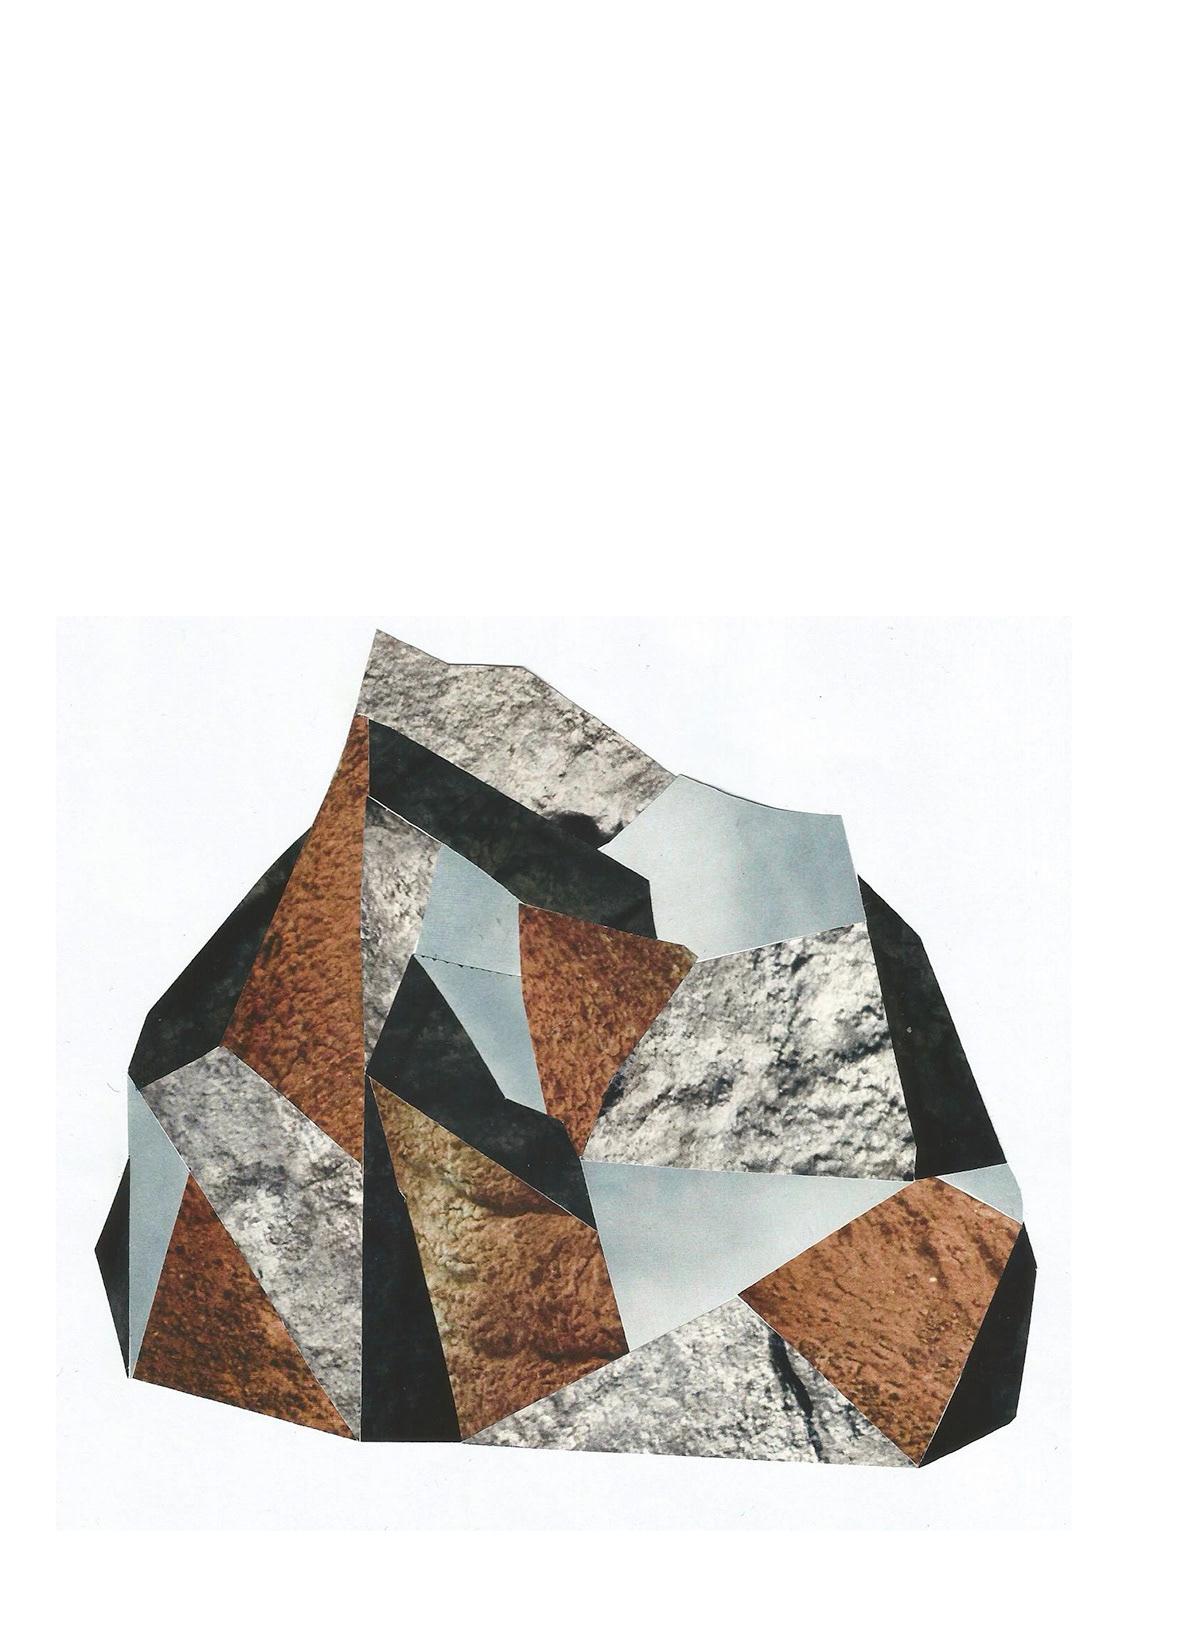 handmade collage design mixtechiniques rock study sketch